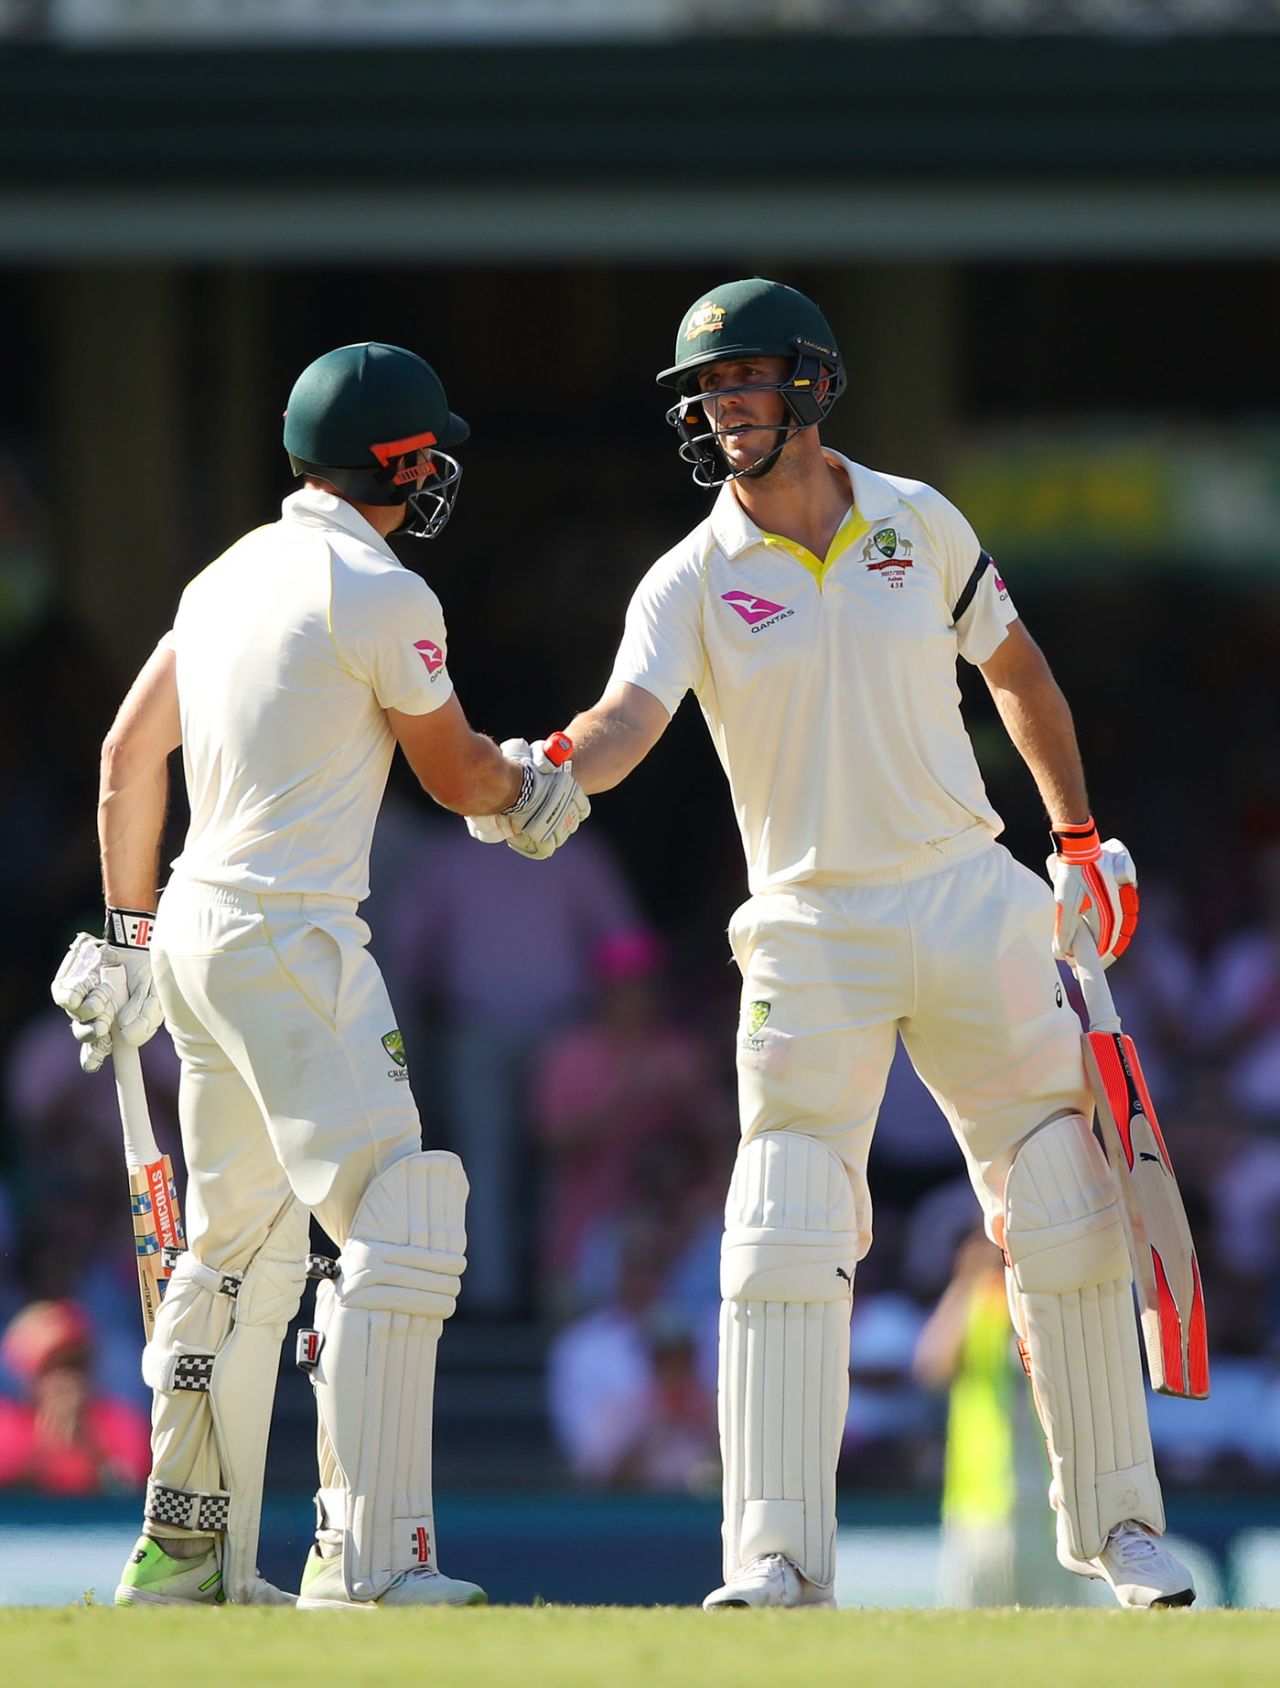 Mitchell Marsh gets a handshake from his brother on reaching fifty, Australia v England, 5th Test, Sydney, 3rd day, January 6, 2017